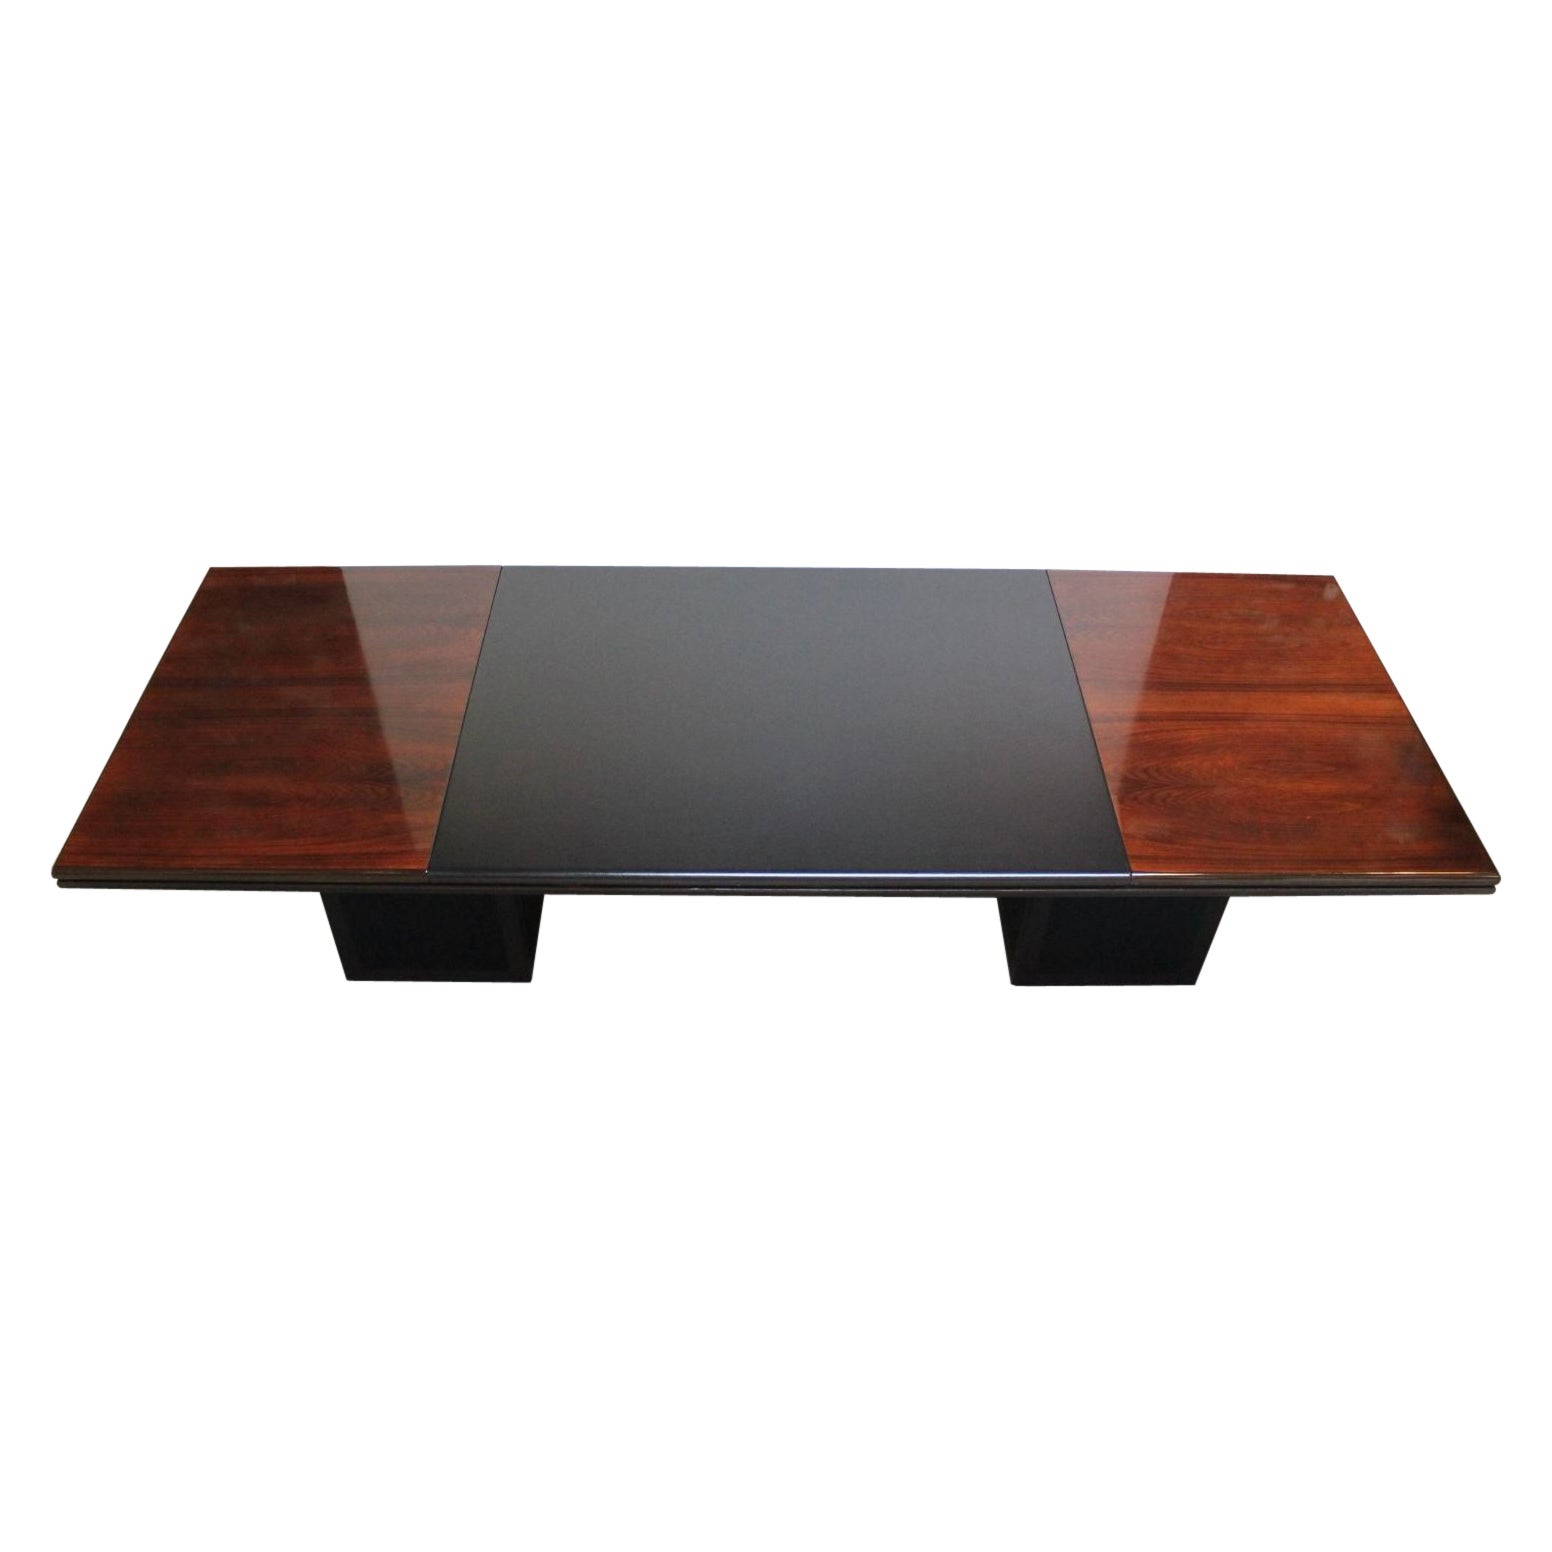 Large Italian Rosewood and Leather Conference Table/Desk By Hans Von Klier For Sale